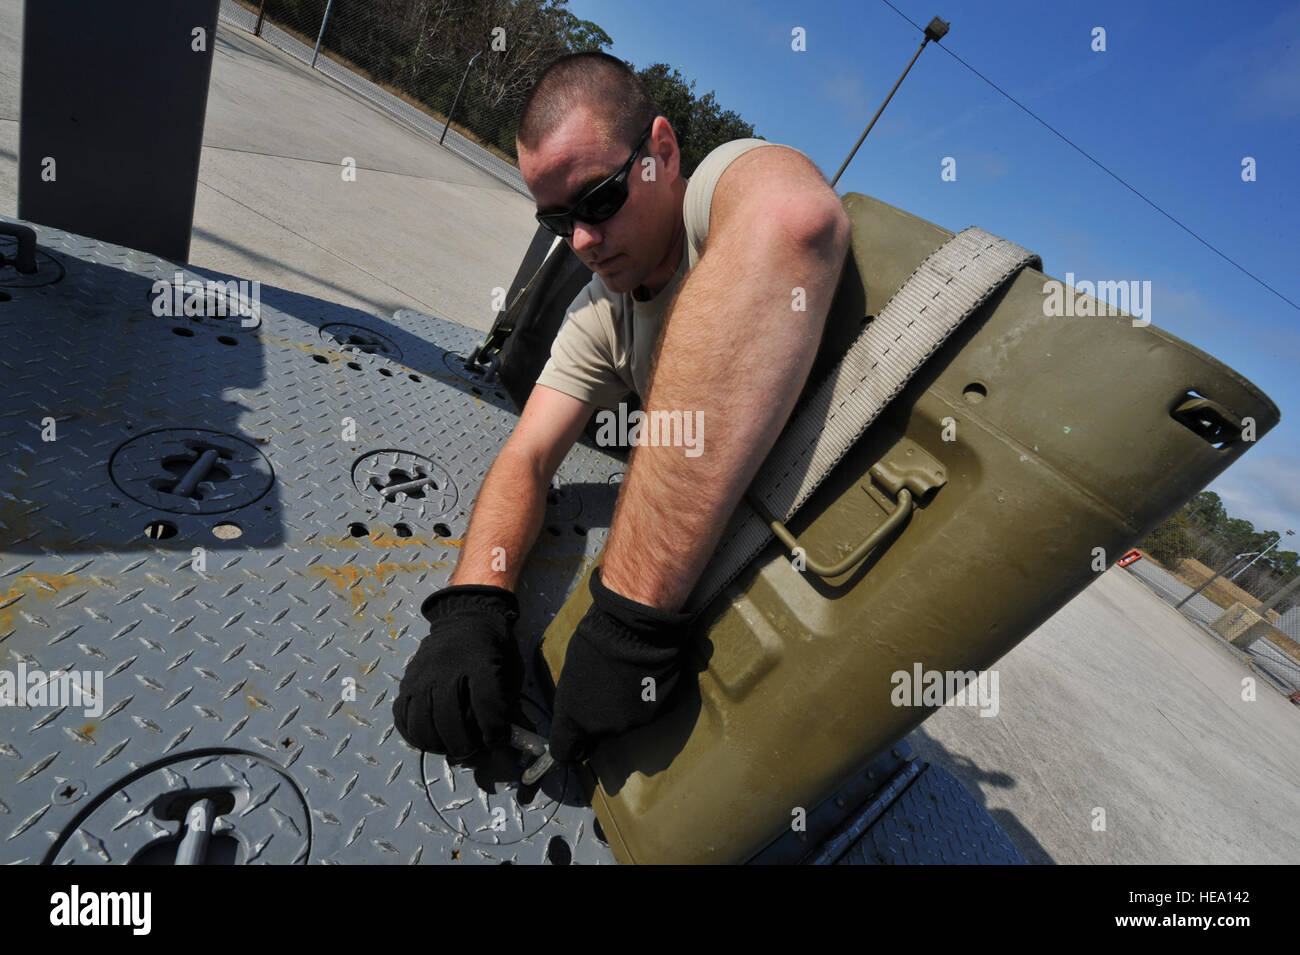 Senior Airman Patrick Beam, 1st Special Operations Equipment Maintenance Squadron munitions line delivery driver, secures a container of 40mm rounds to a munitions trailer on Hurlburt Field, Fla., Dec. 6, 2013. Line delivery drivers Properly secured containers to prevent damage during transport. Staff Sgt. John Bainter) Stock Photo